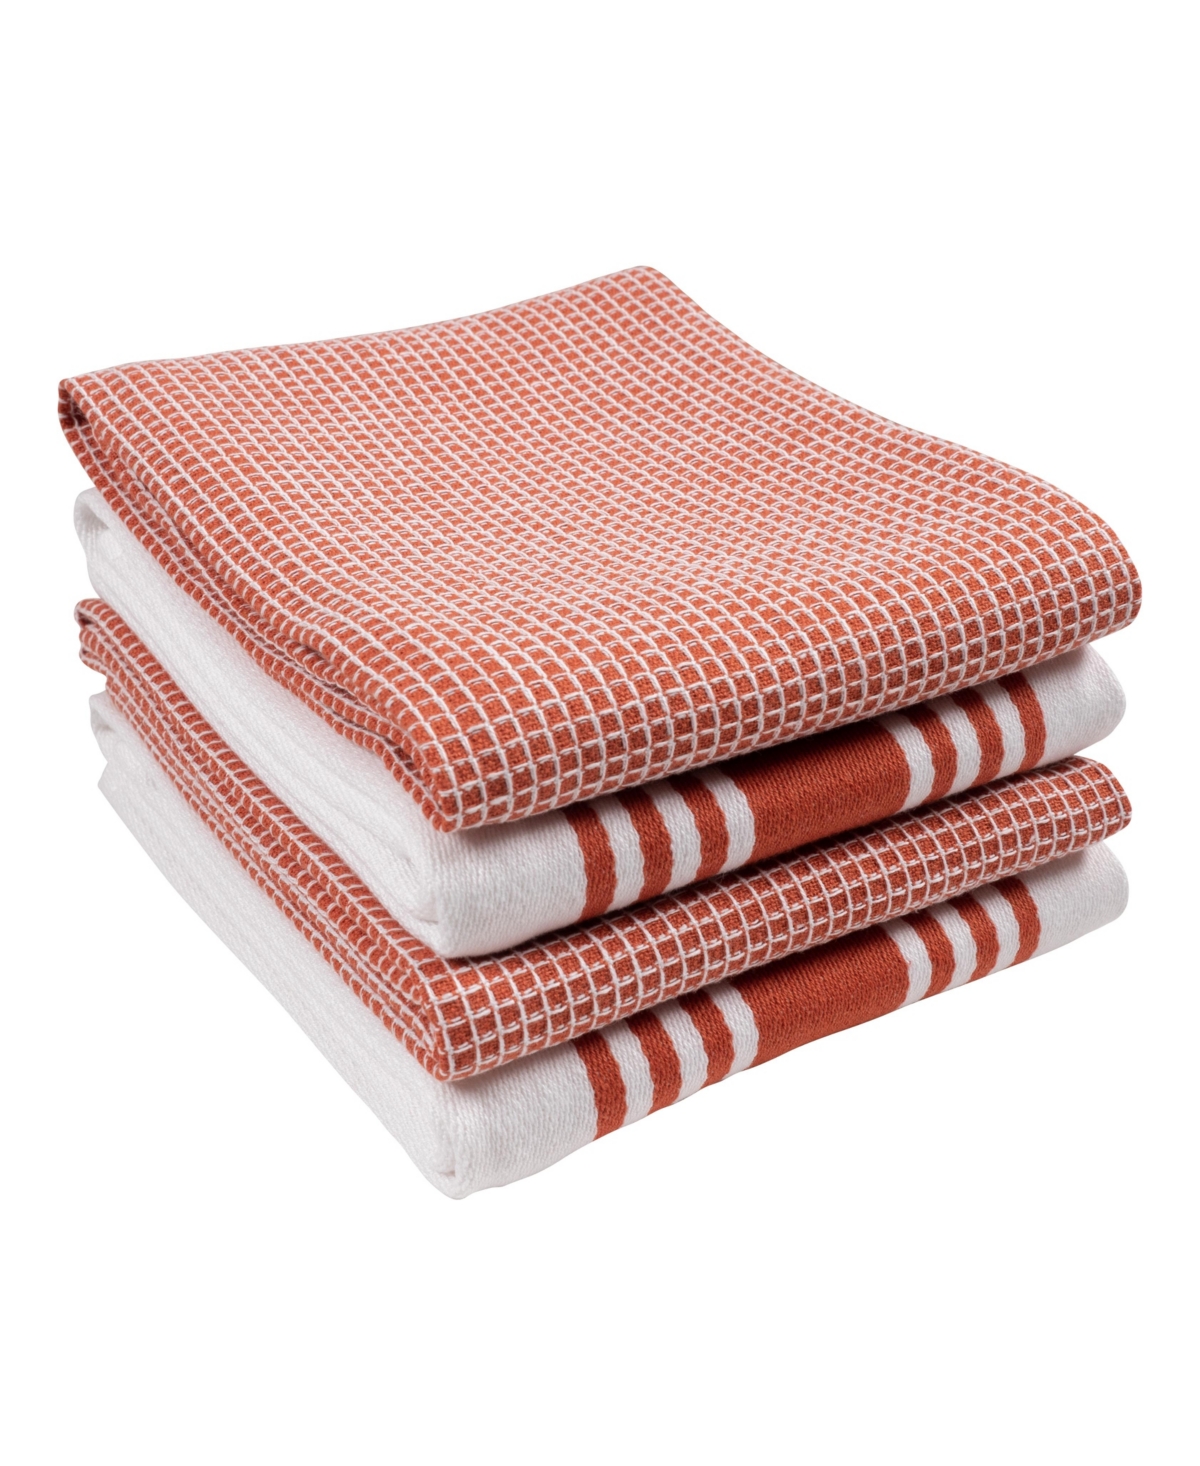 Arkwright Cotton Kitchen Towels (12 Pack, 15x25 in.) Windowpane Stripes - Beige